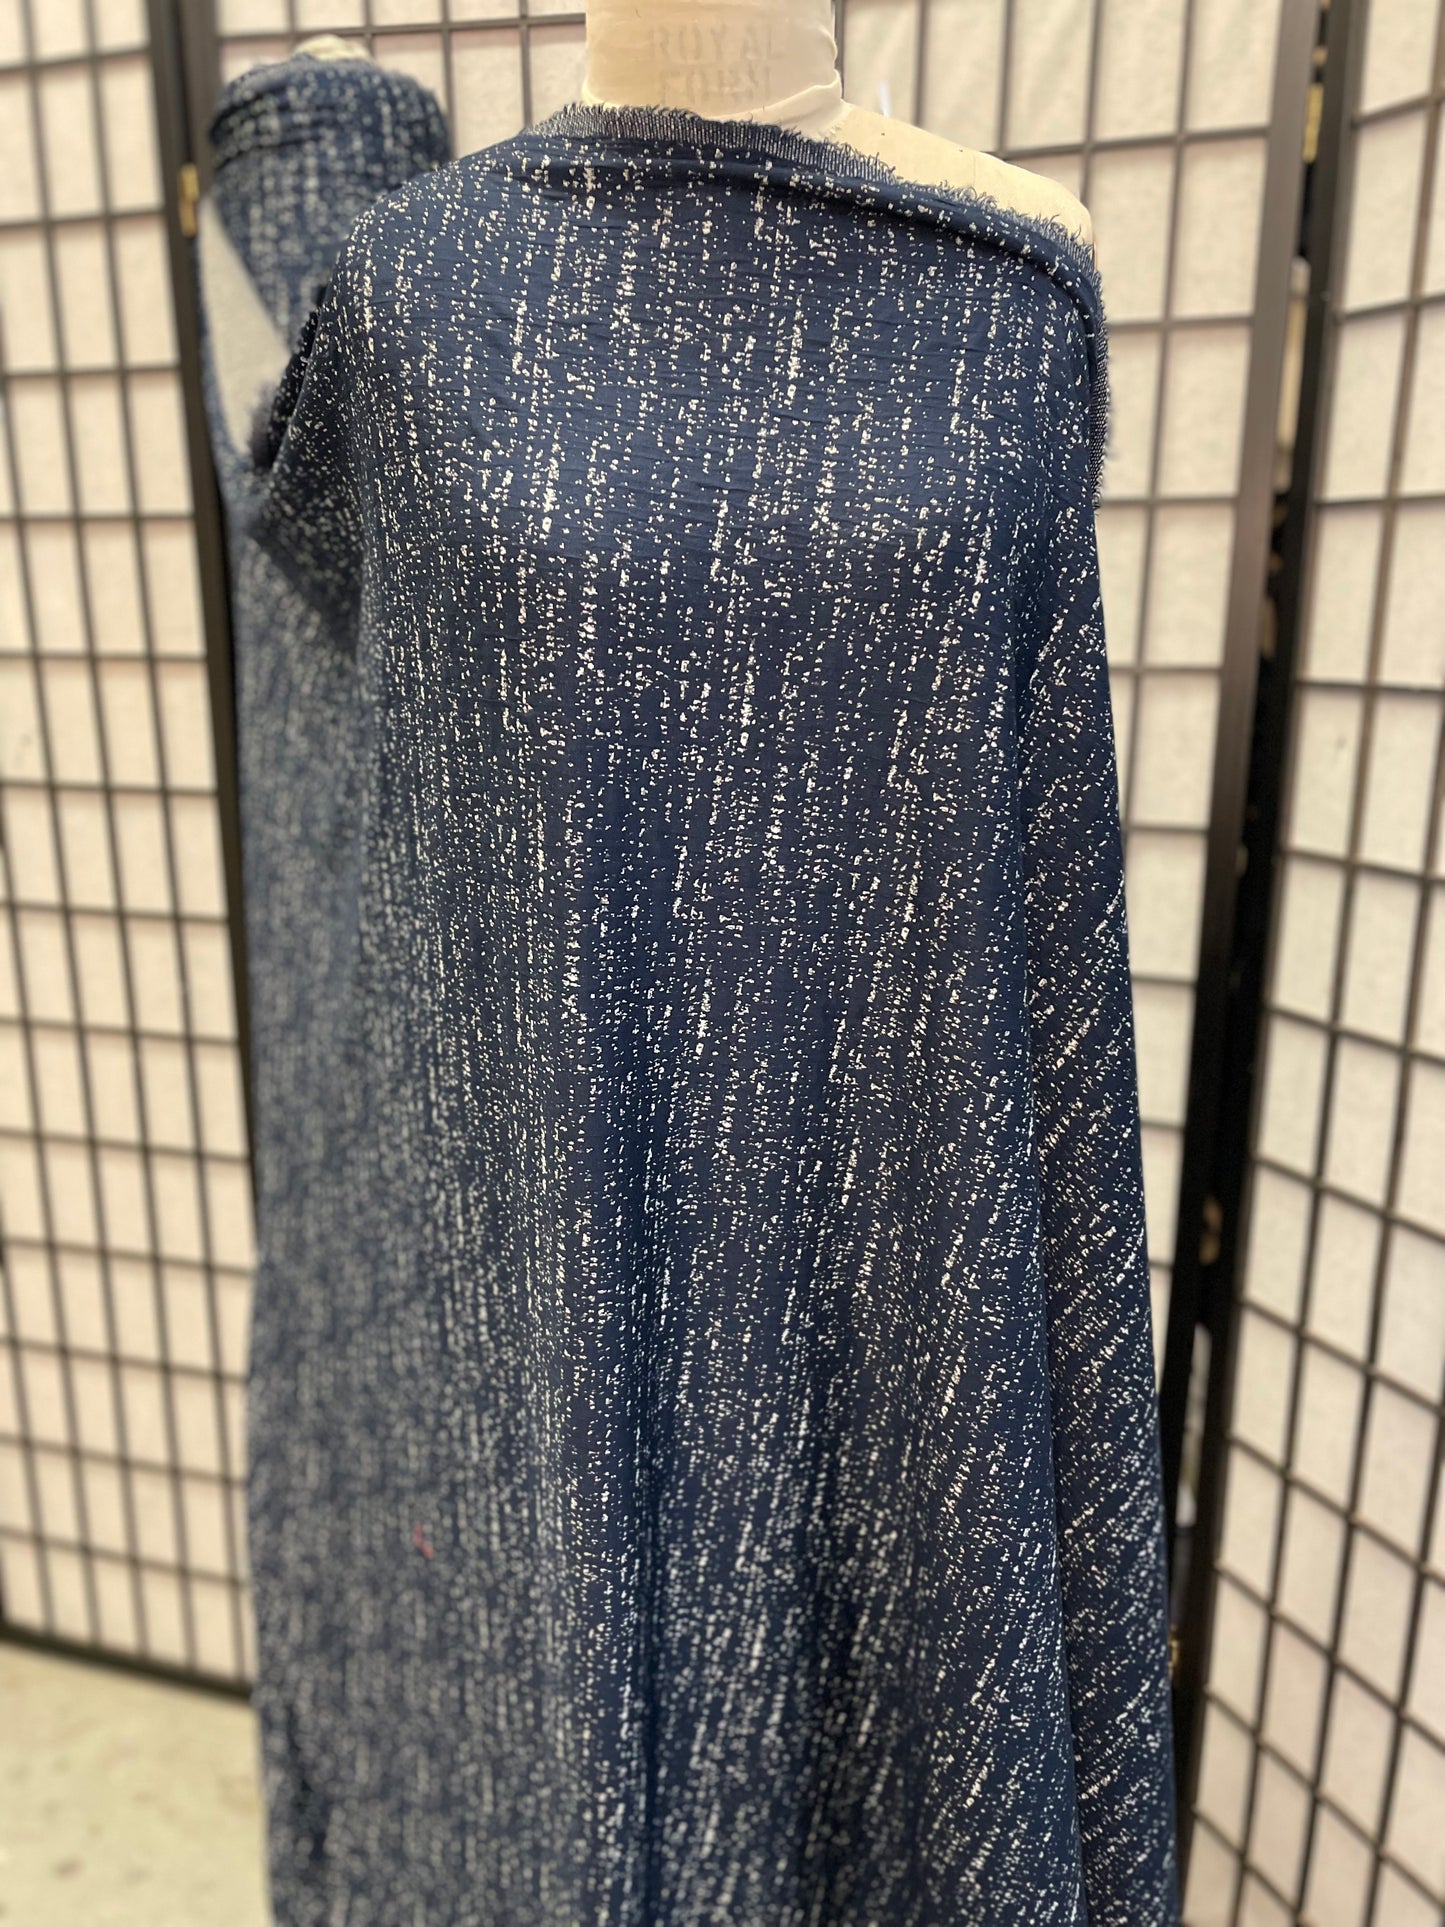 Textured Double Knit Stretch Rayon - Navy / White